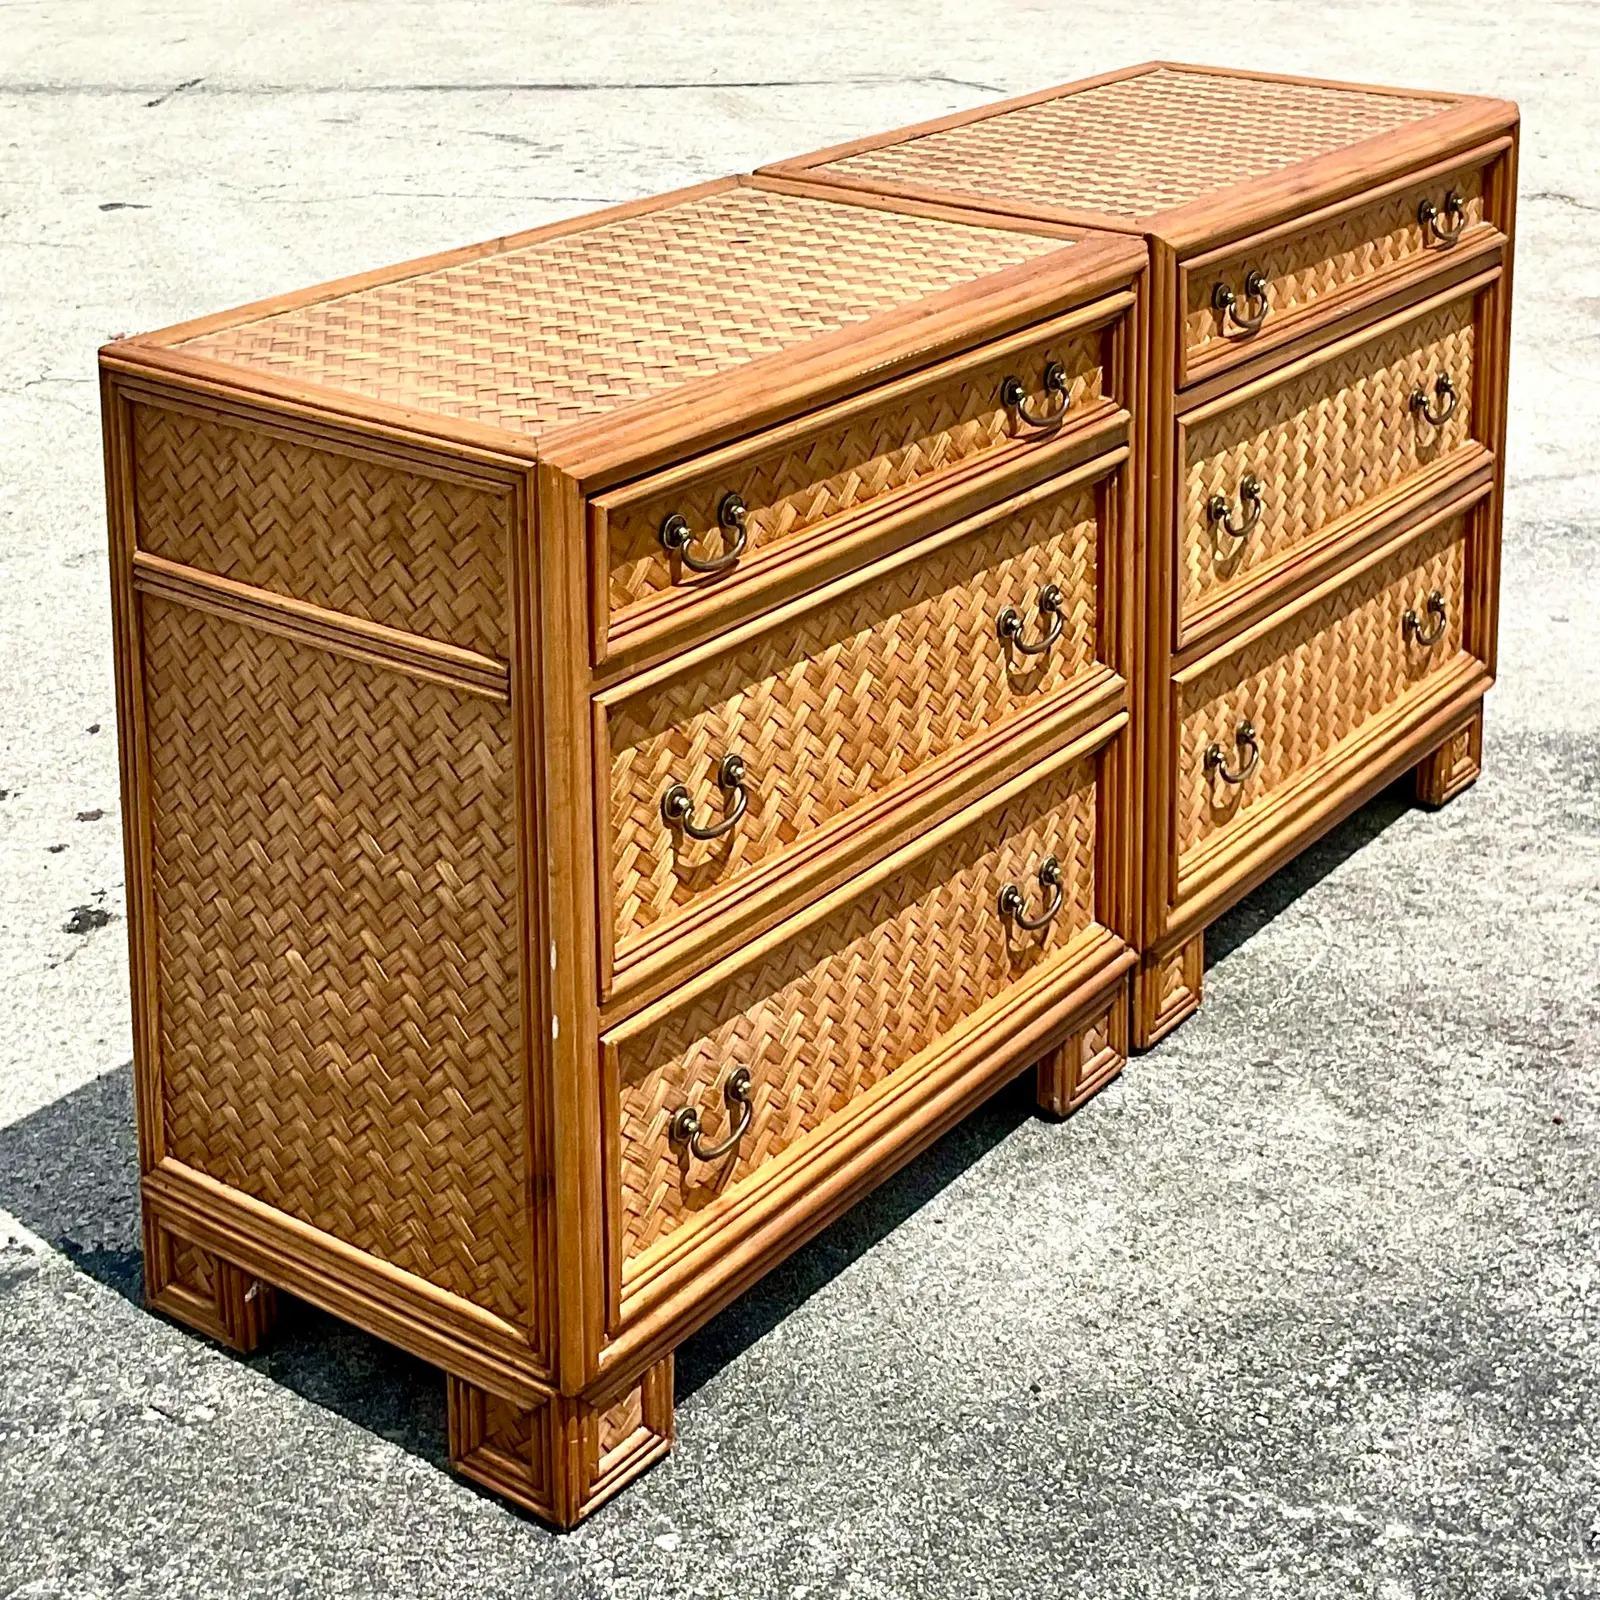 Fantastic pair of vintage Coastal chest of drawers. Made by the Whitecraft group. Beautiful woven rattan with solid rattan trim. Acquired from a Palm Beach estate.